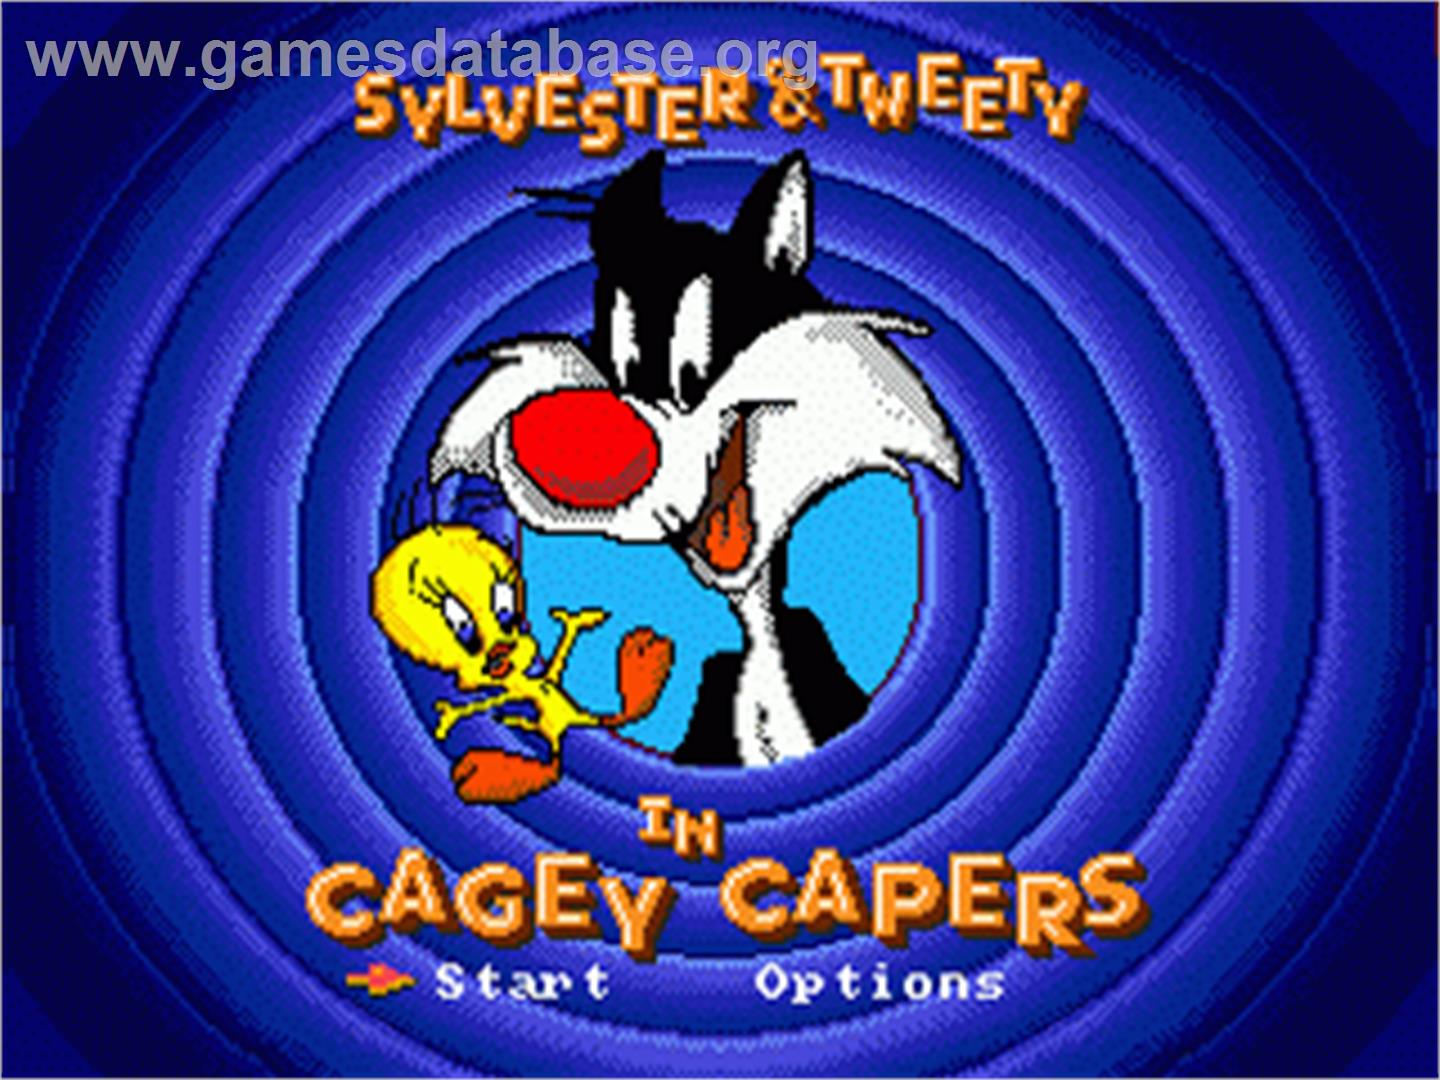 Sylvester and Tweety in Cagey Capers - Sega Genesis - Artwork - Title Screen